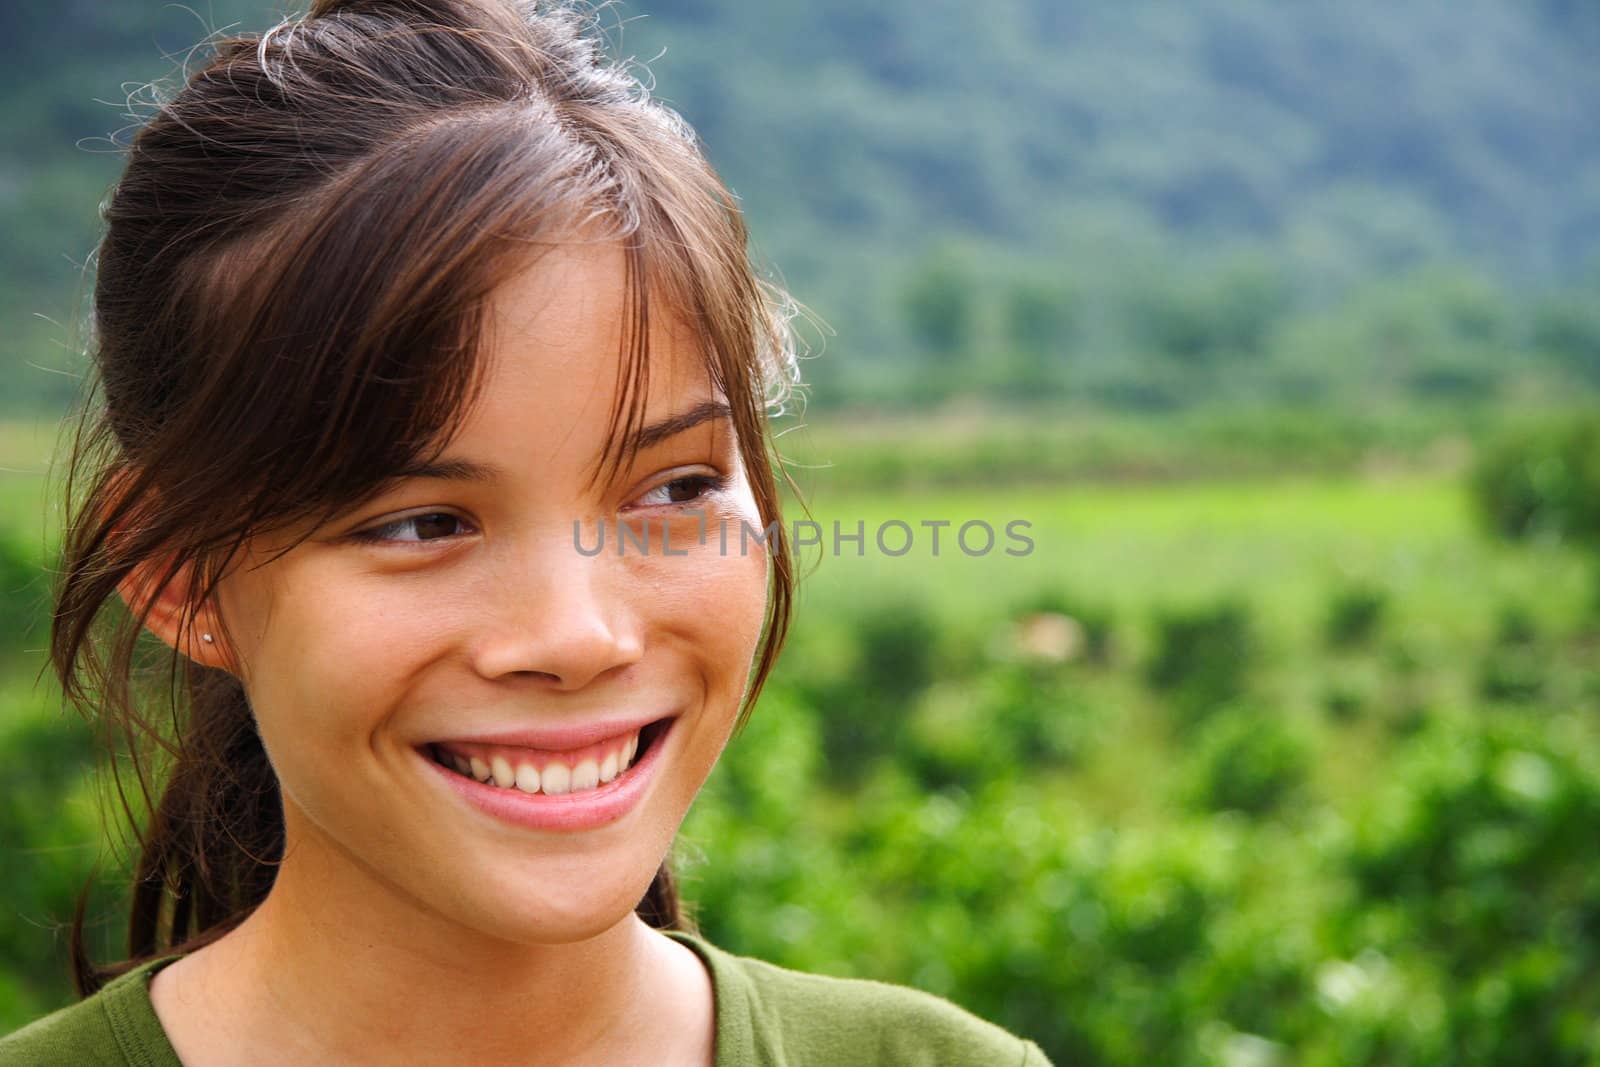 Young woman looking away outdoors with nature background.